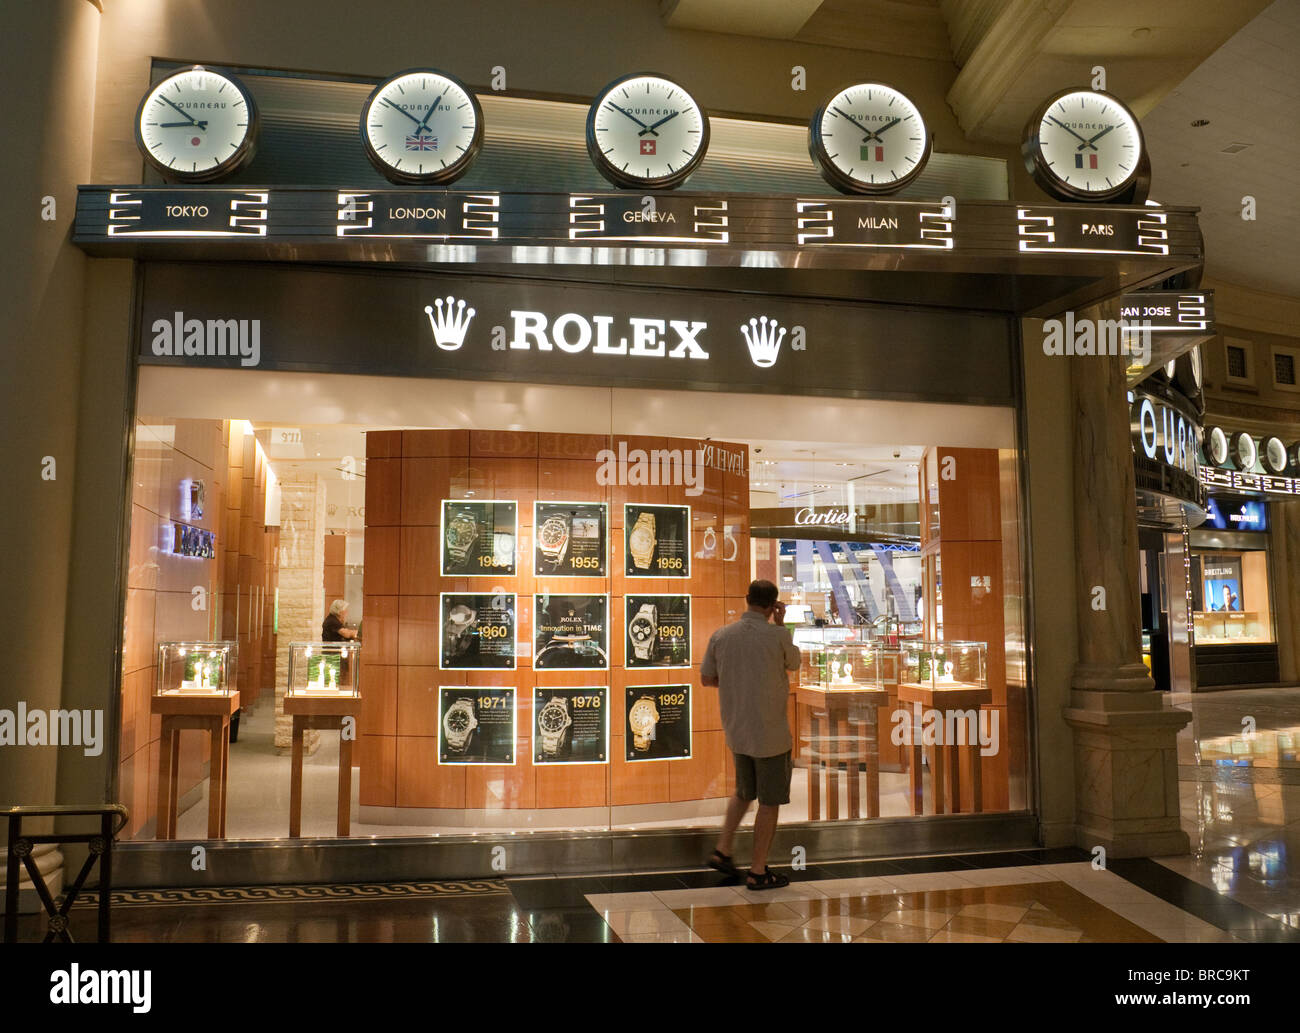 rolex outlet store